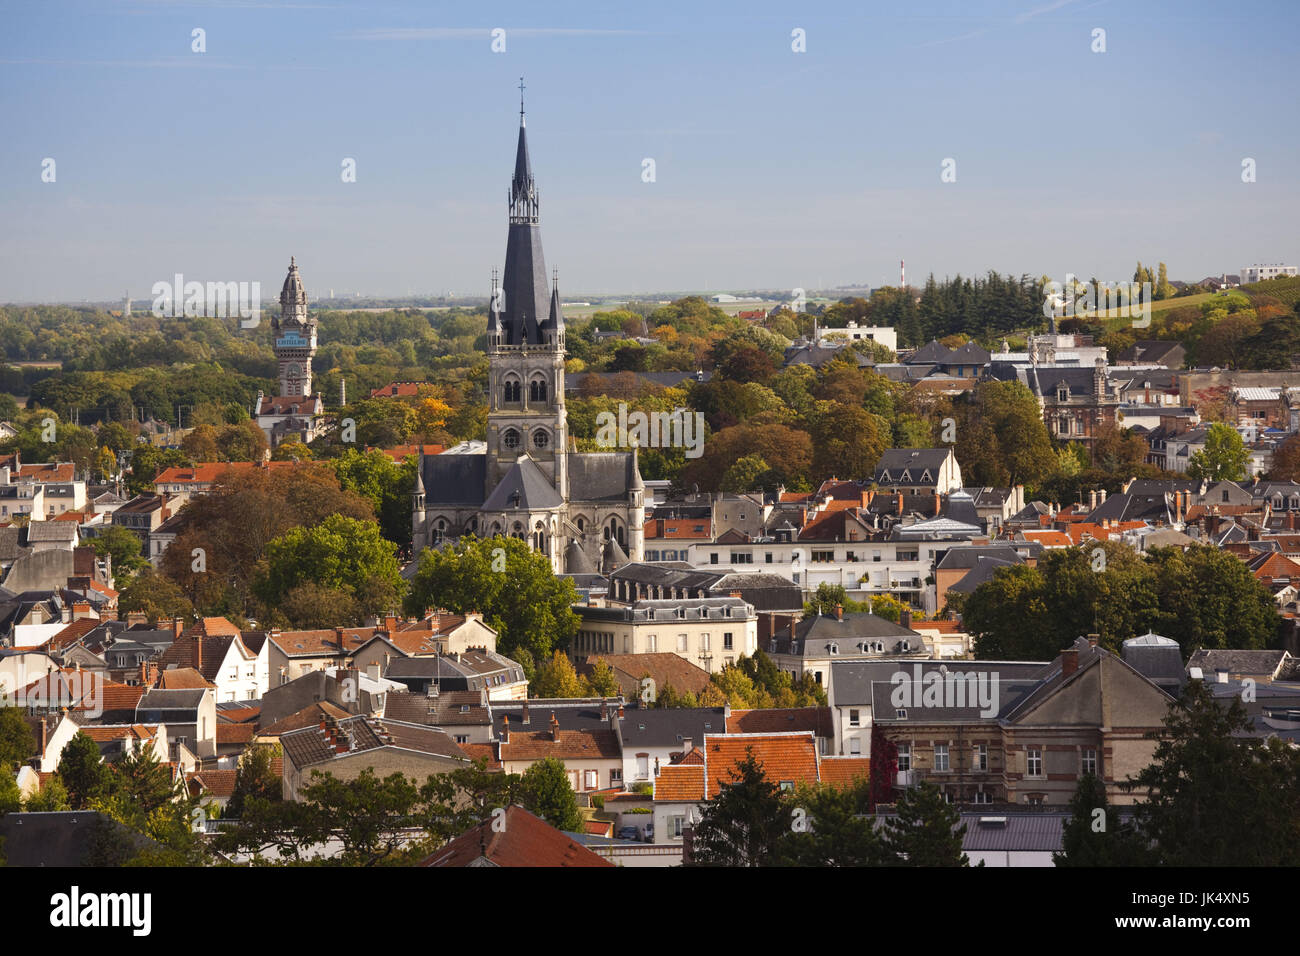 France, Marne, Champagne Region, Epernay, town overview with Eglise Notre Dame church Stock Photo